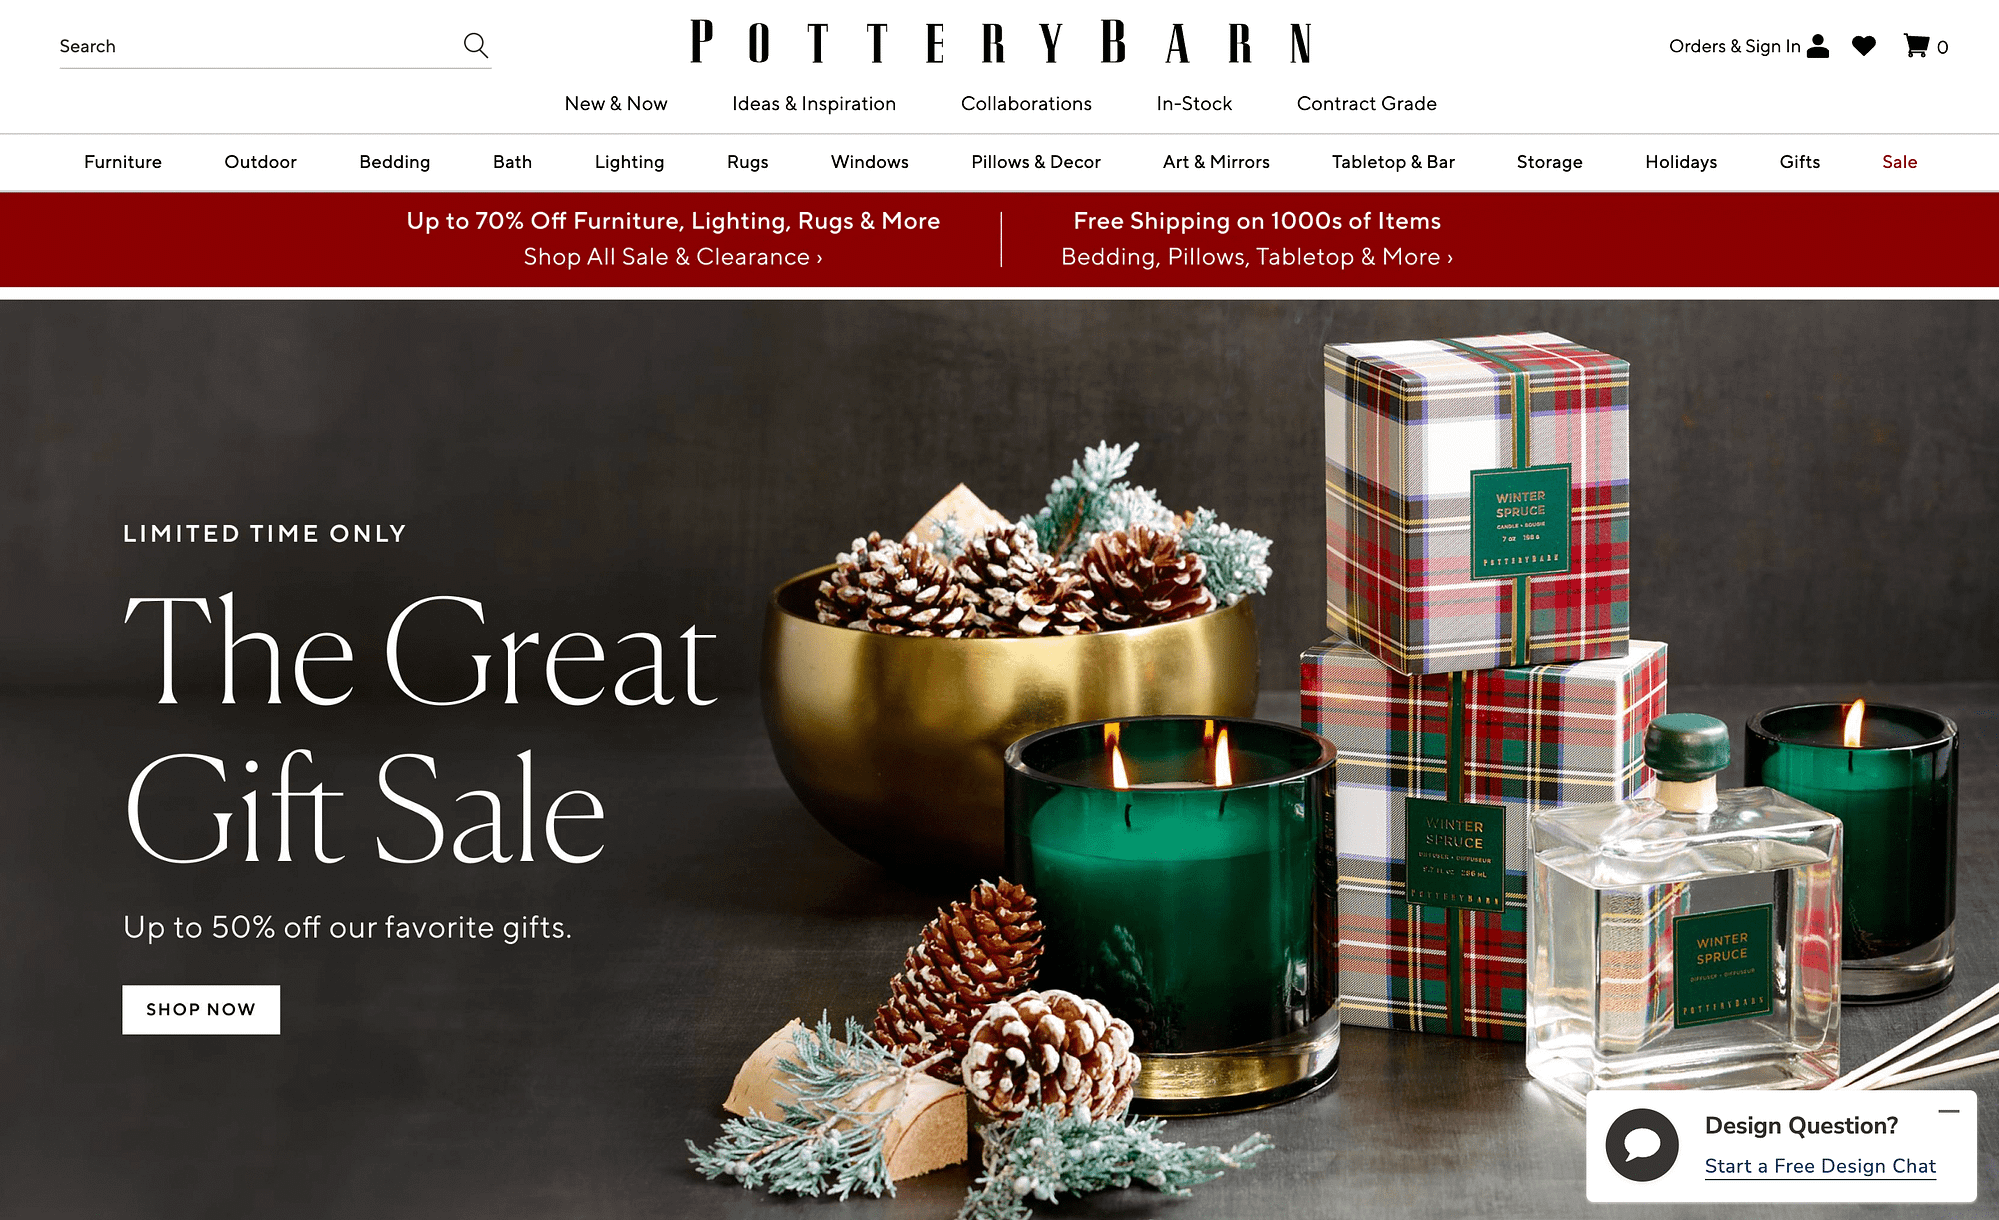 A limited time only sale on the Pottery Barn website. This is an excellent Christmas promotion idea.